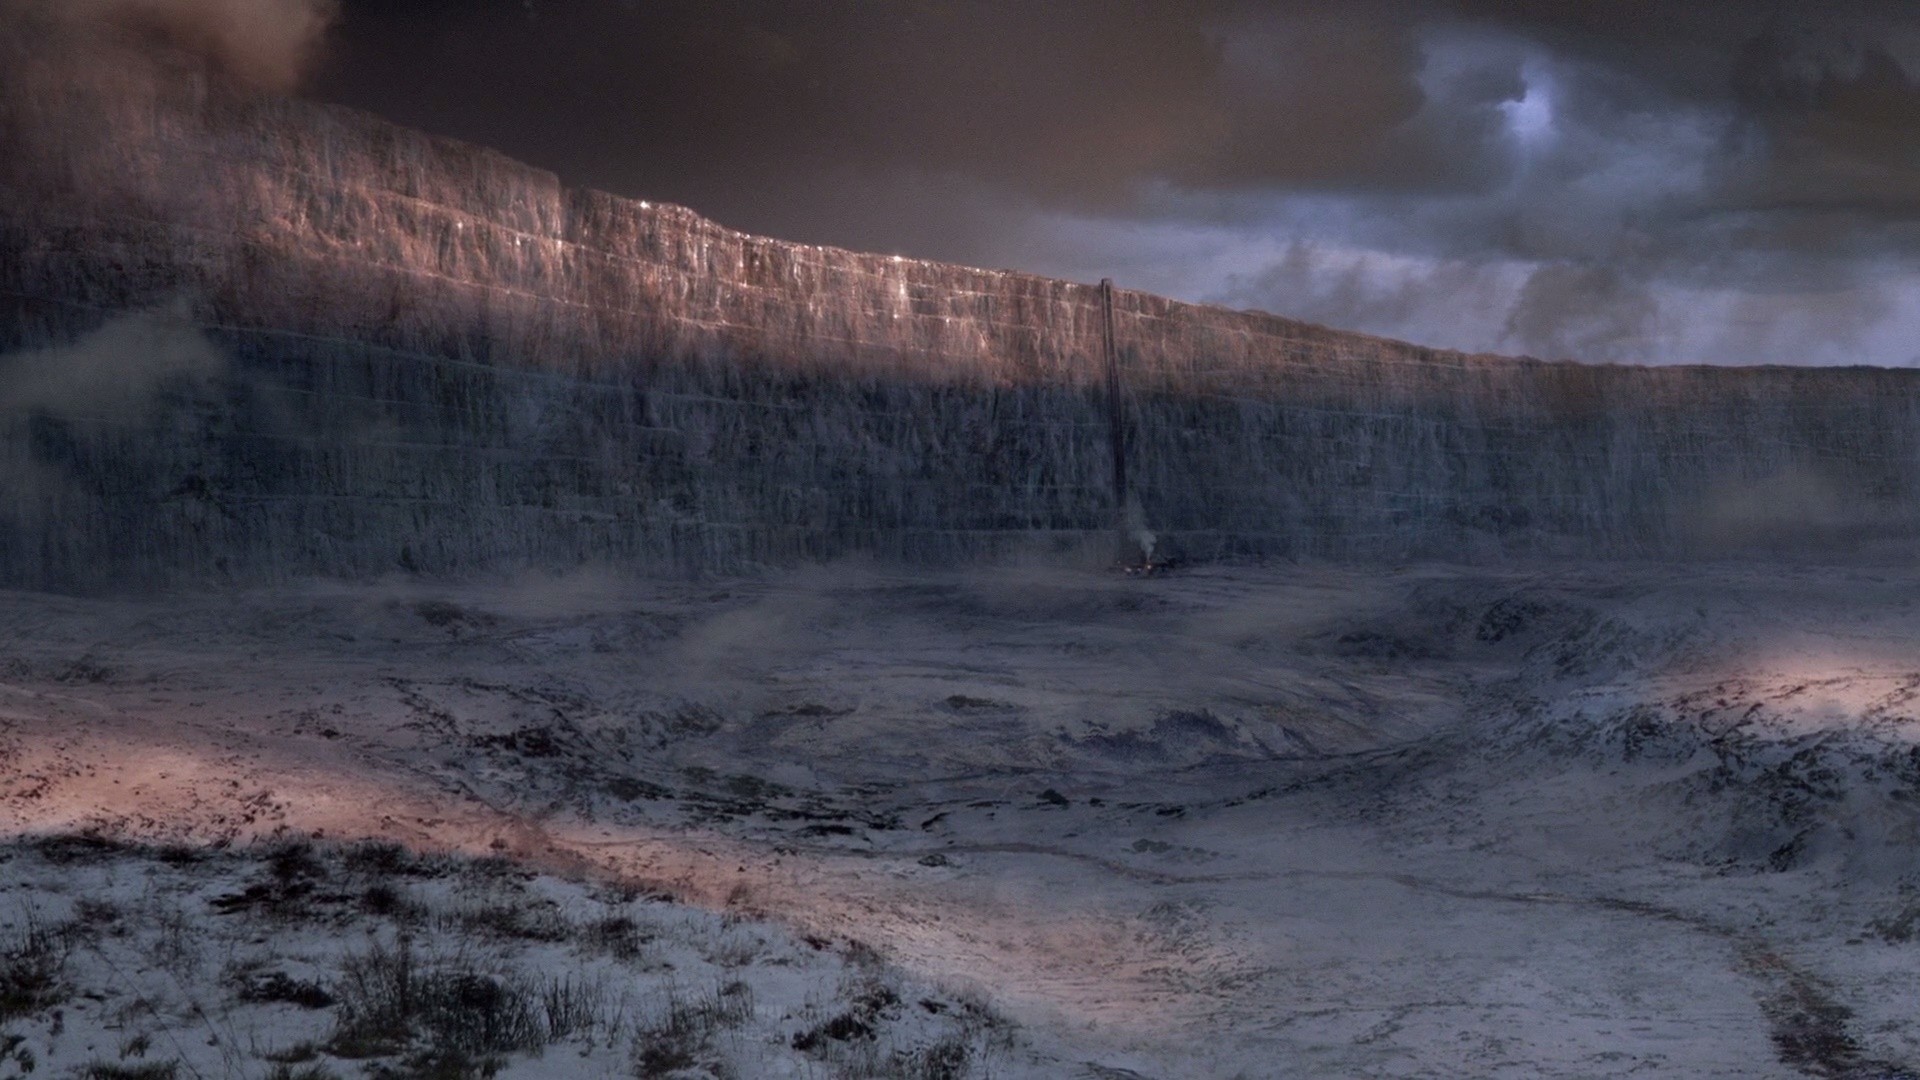 Game of Thrones, The Others, The Wall, Winter Wallpaper